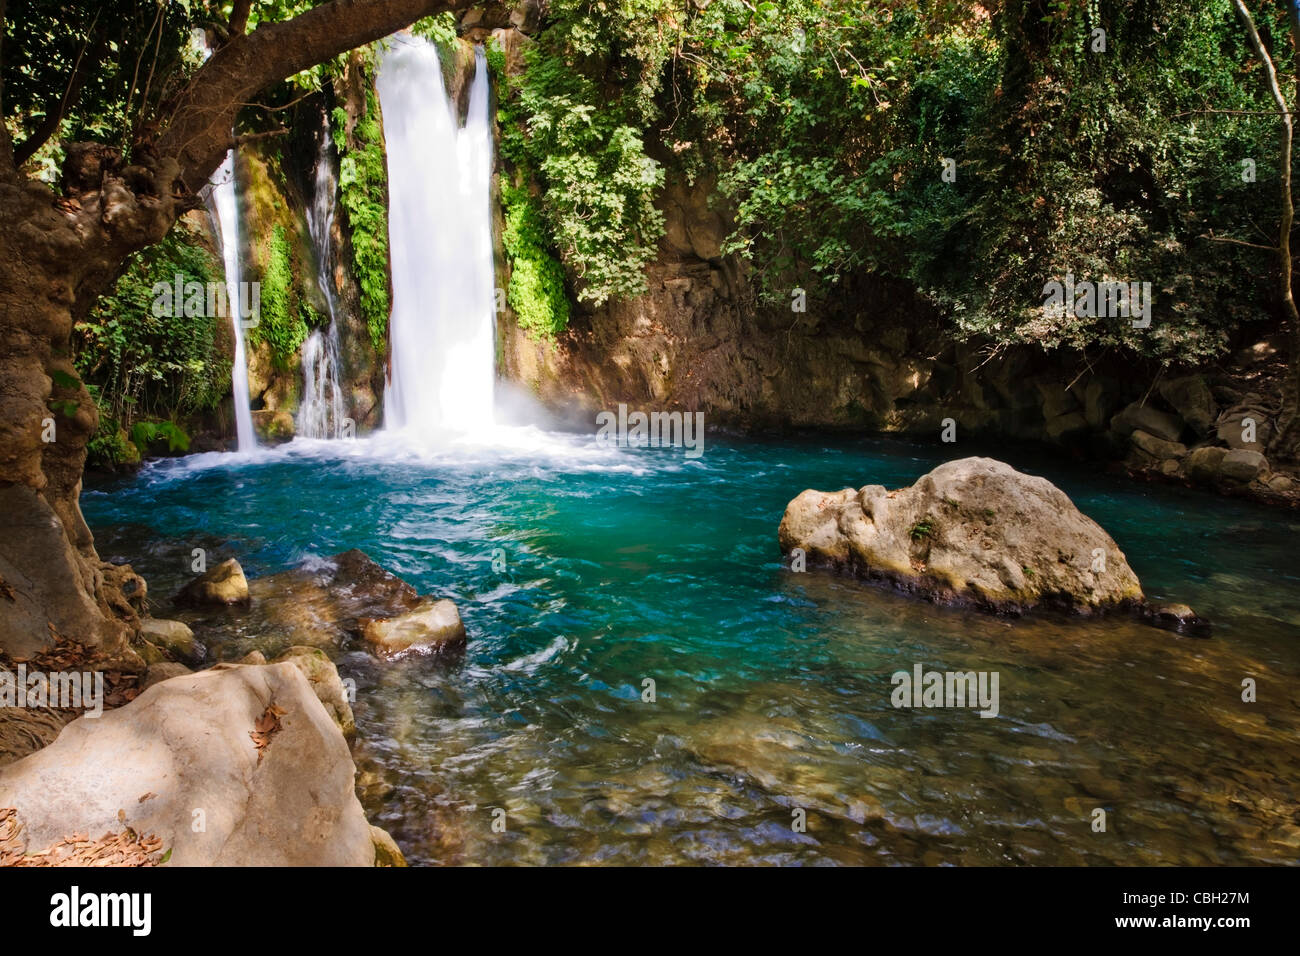 Israel. The Waterfall at the Banias nature reserve in the upper Galilee area. Stock Photo